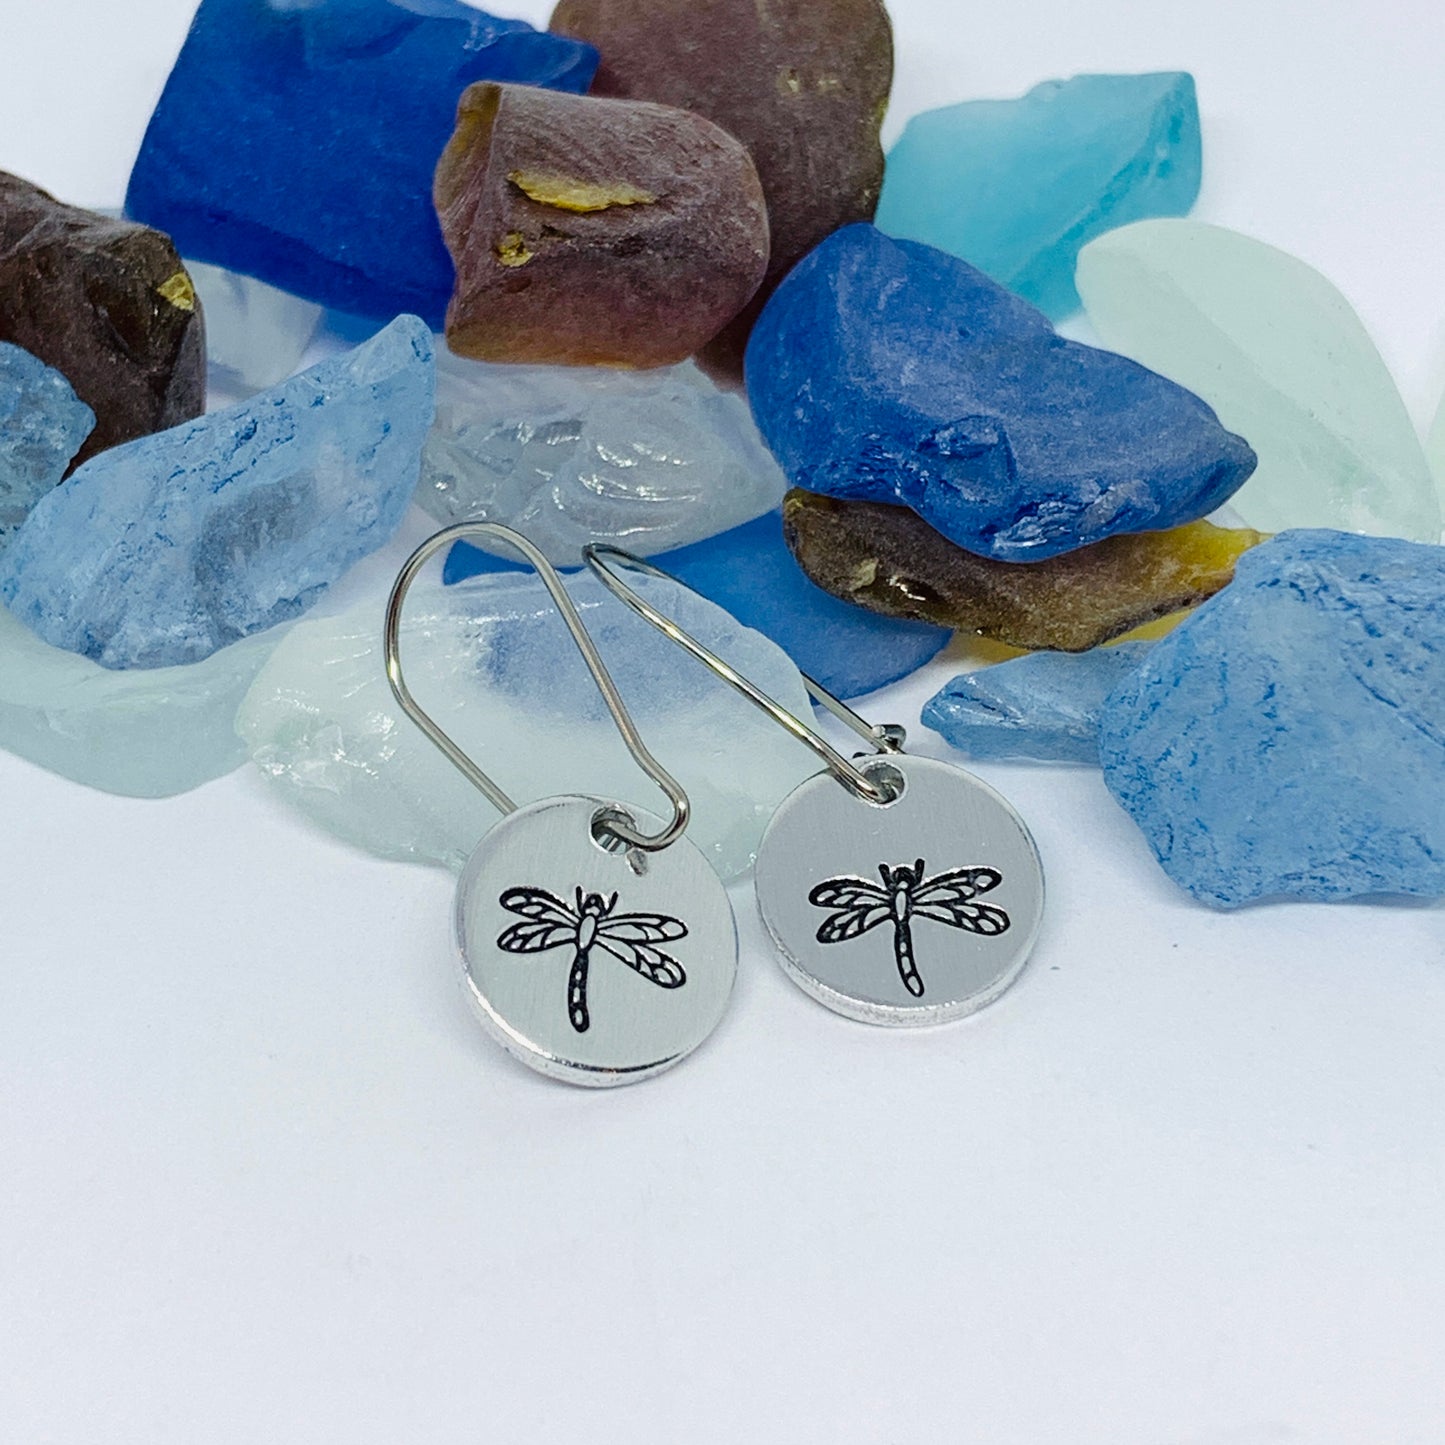 Hand Stamped Dragonfly Silver Wire Earrings with Backs | Hand Stamped Metal Dragonfly Firefly Earrings | Gifts for Her | Nature Earrings